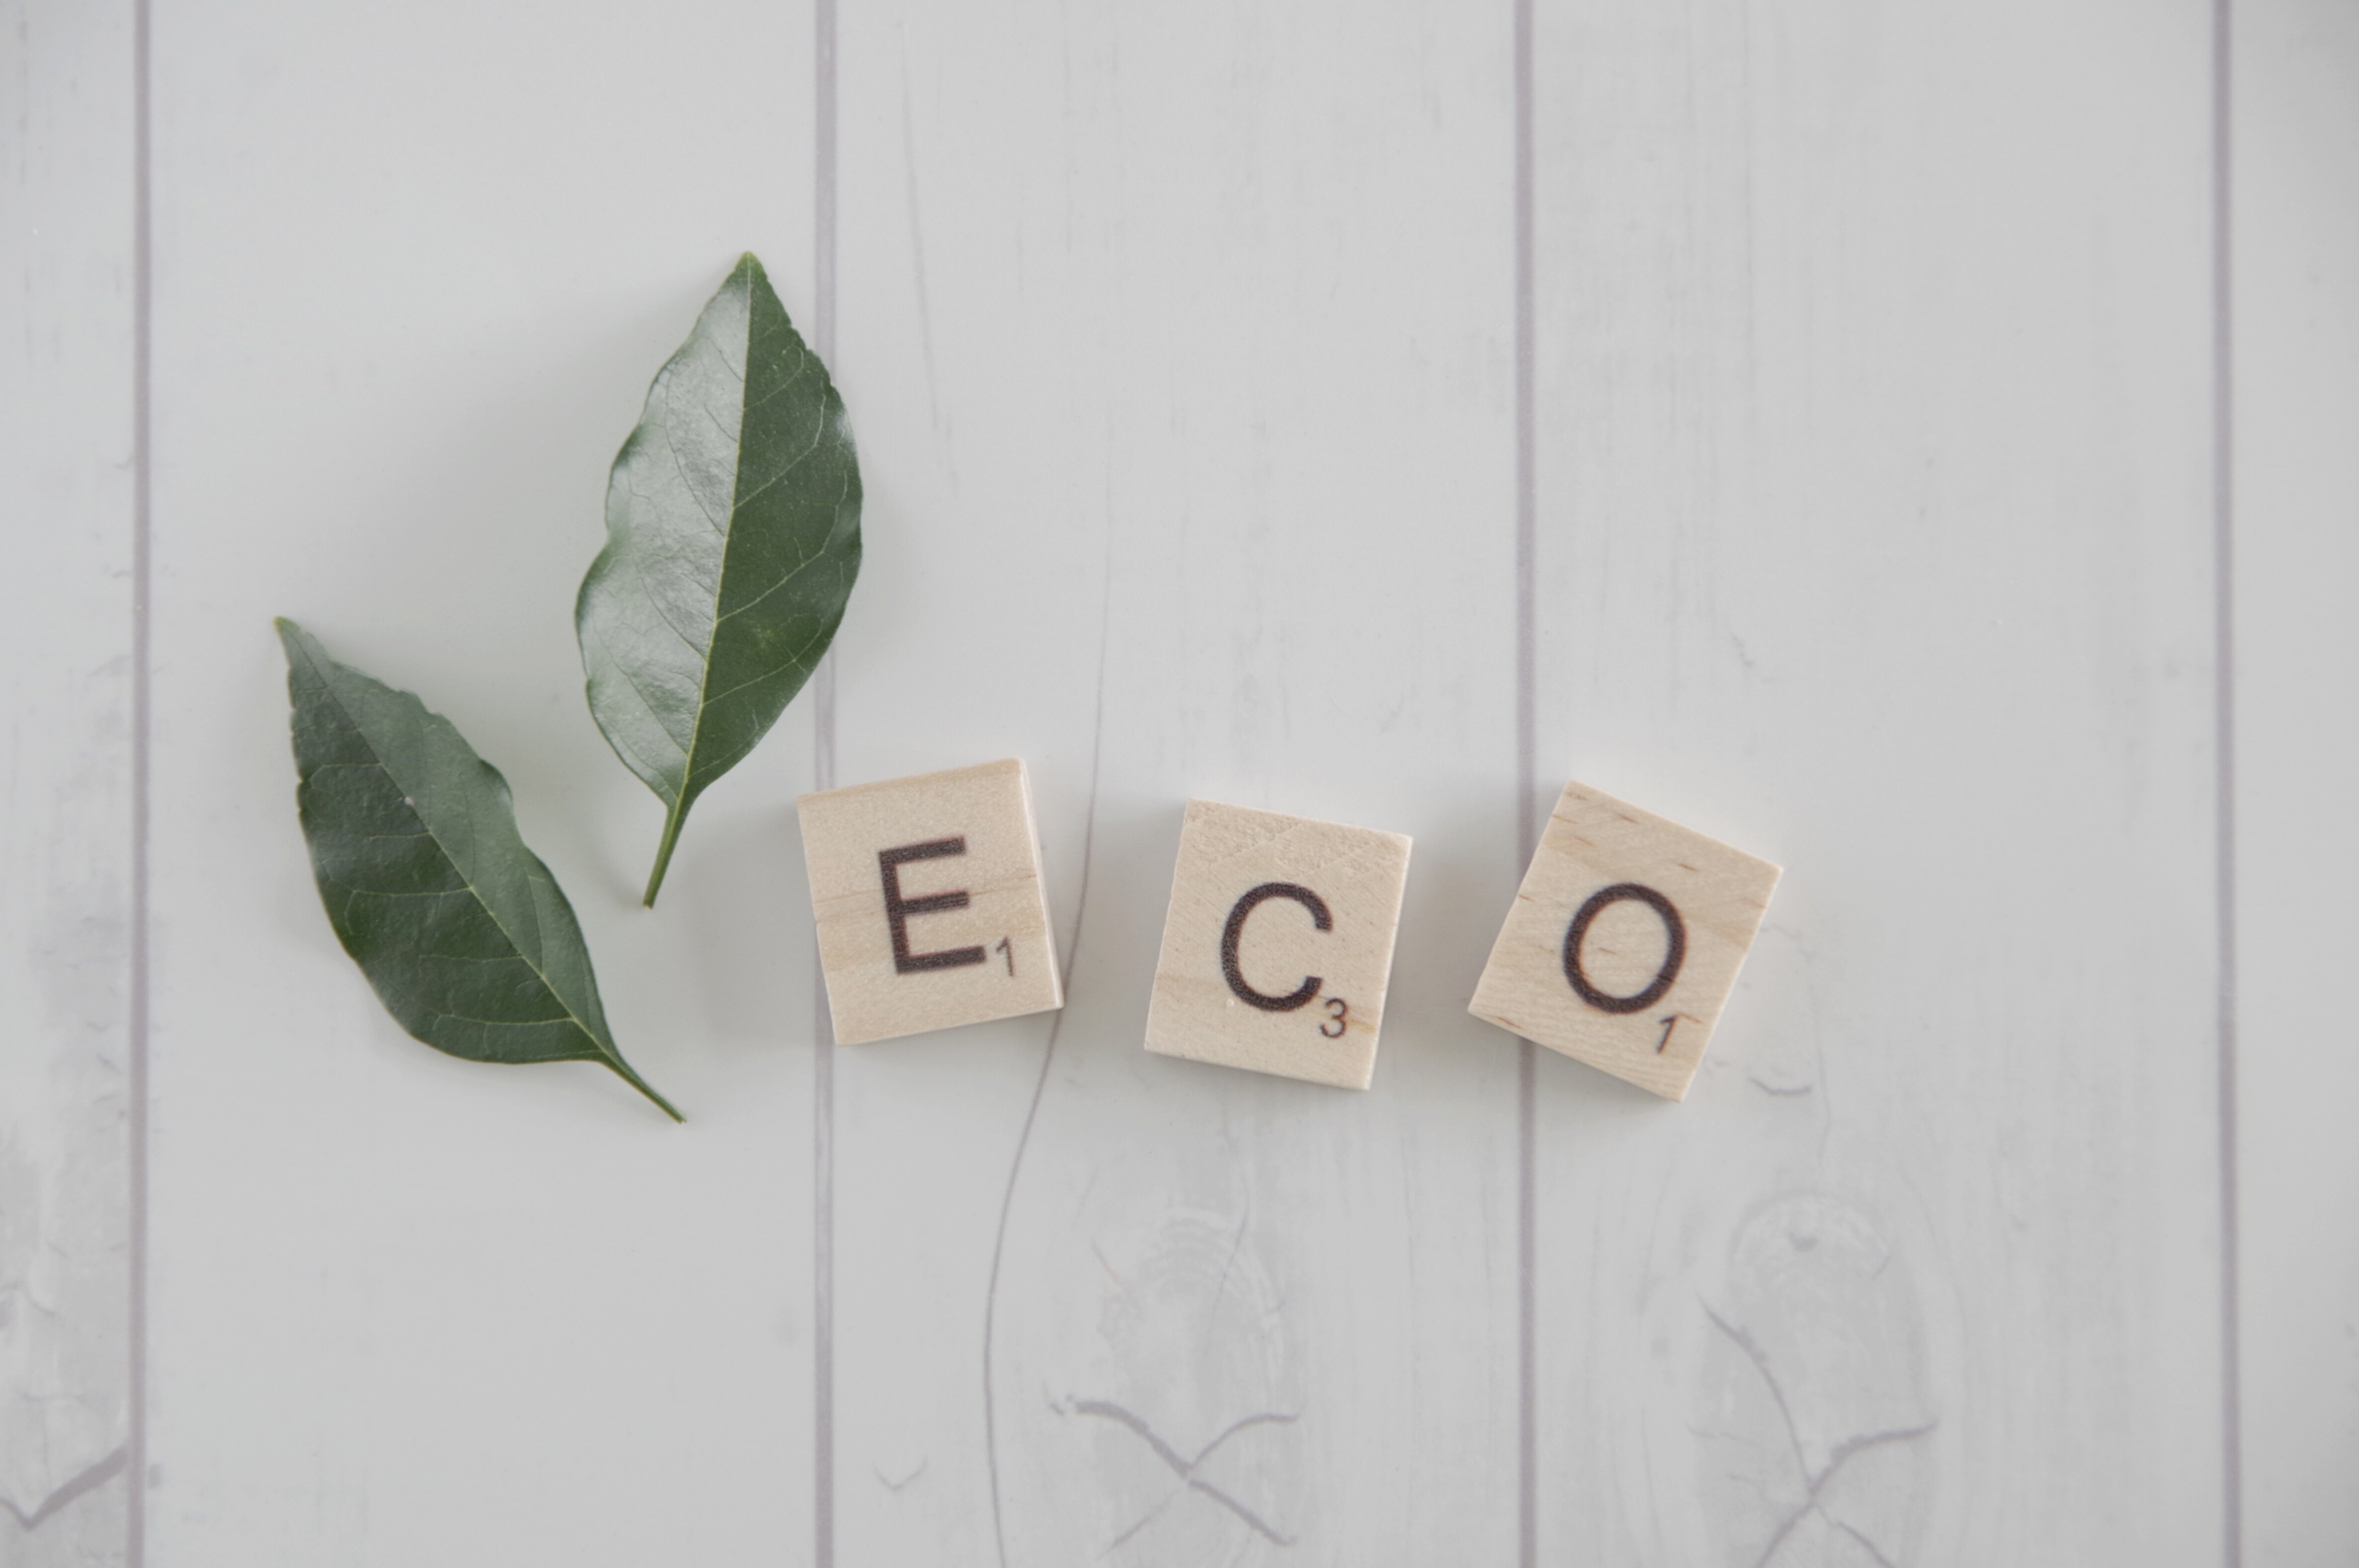 ◇Plan◇Eco cleaning with ECO cooperation benefits